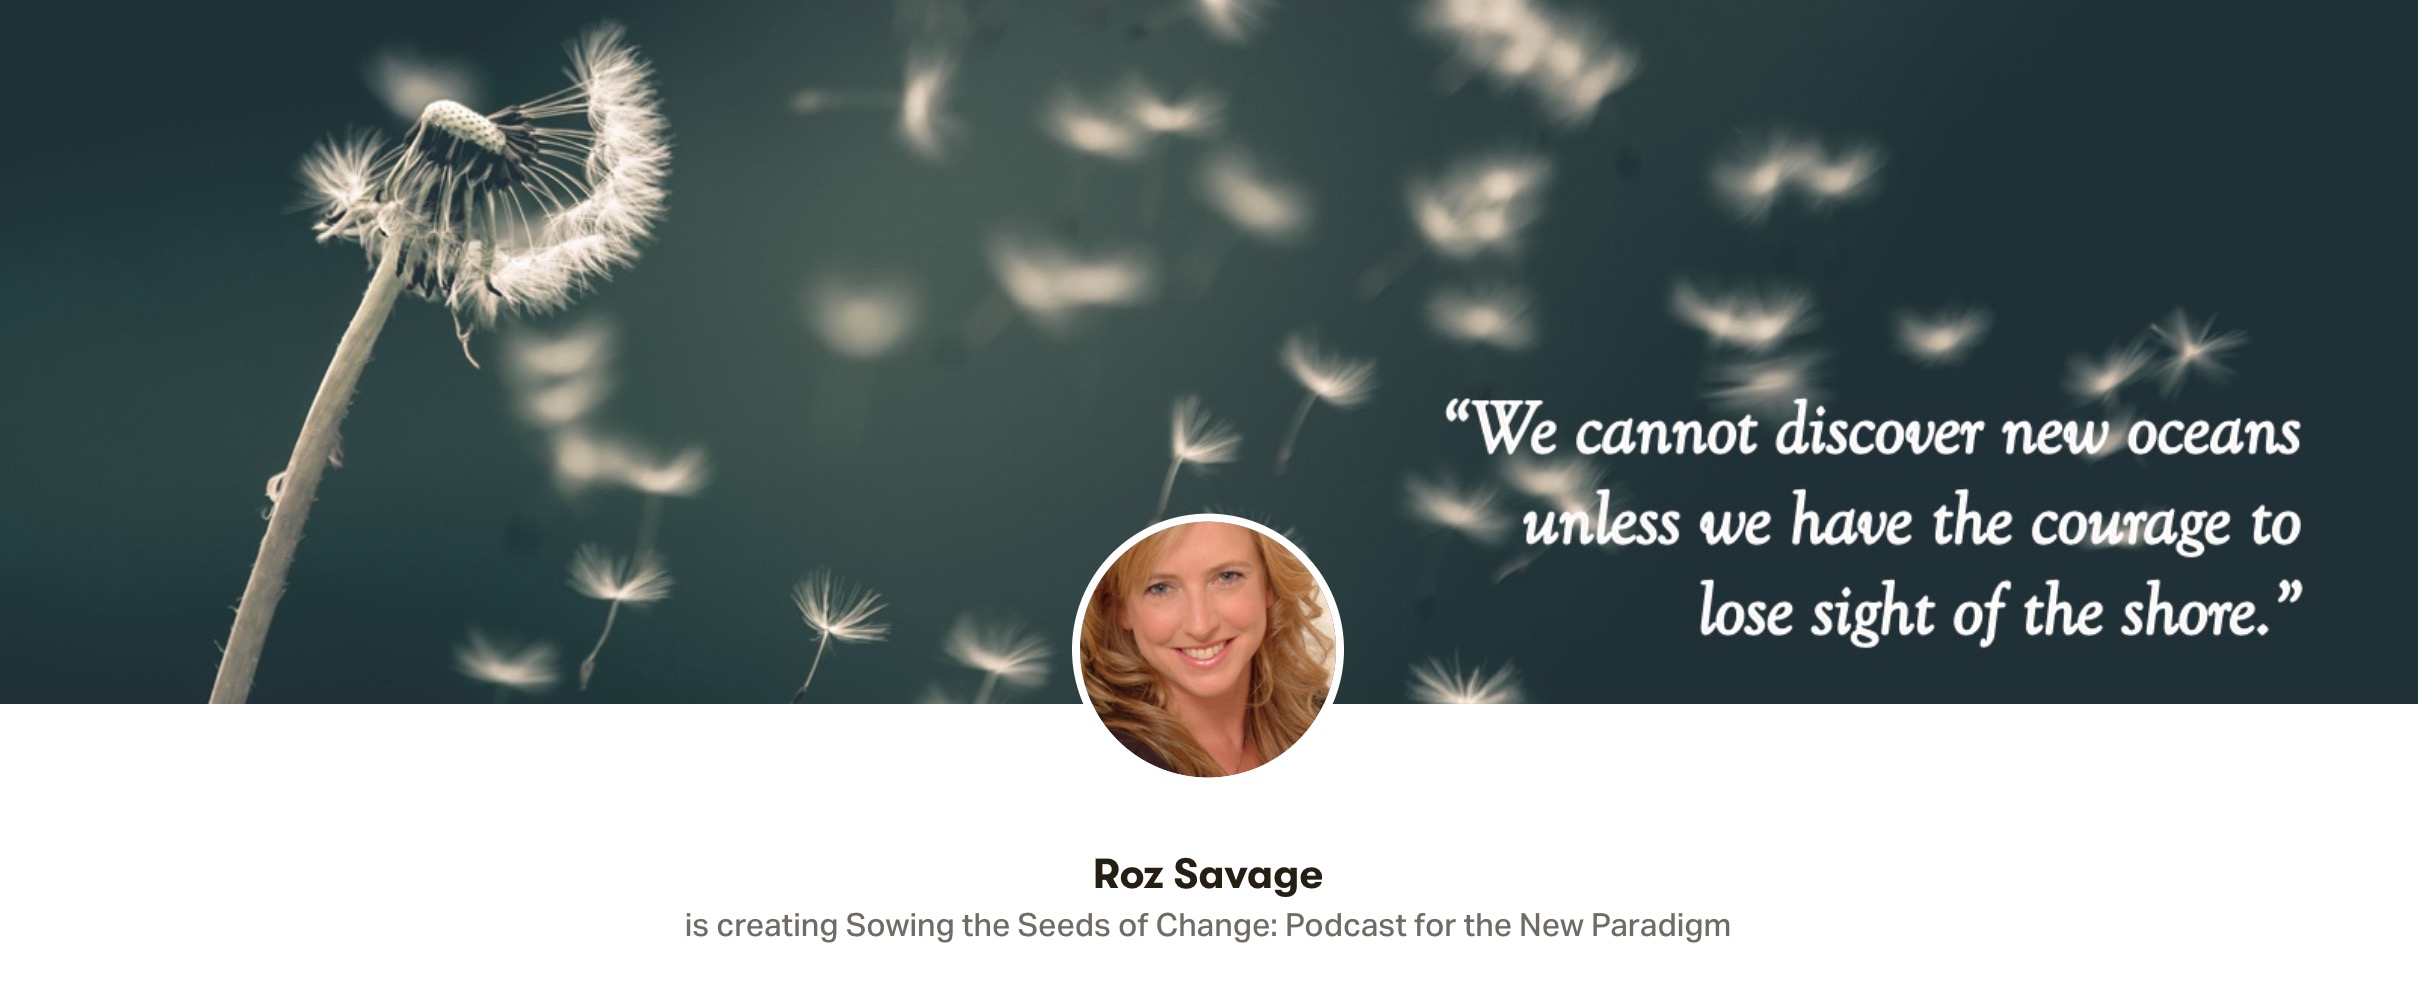 Sowing the Seeds of Change – A New Podcast